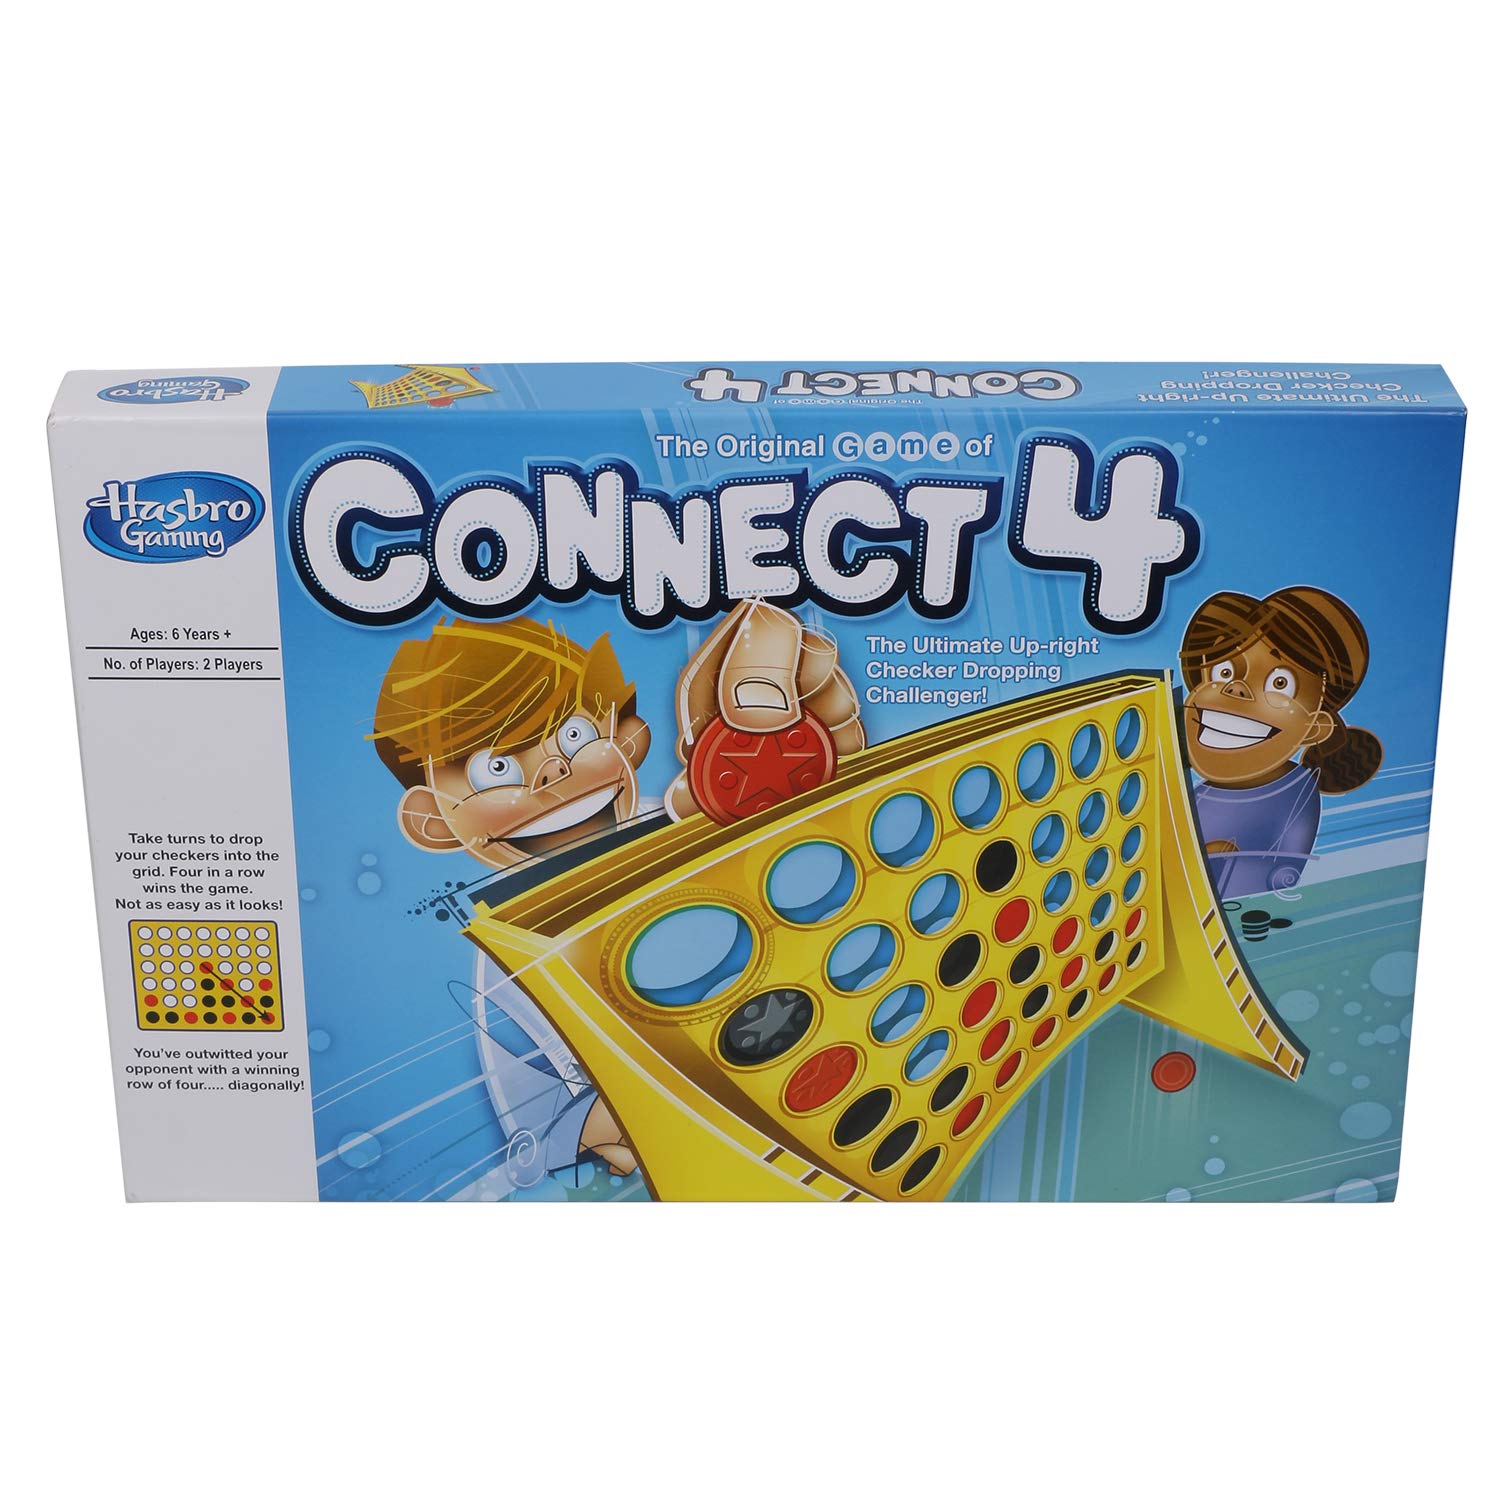 Timeless Fun Game platform - Connect 4 Classic Game - SND